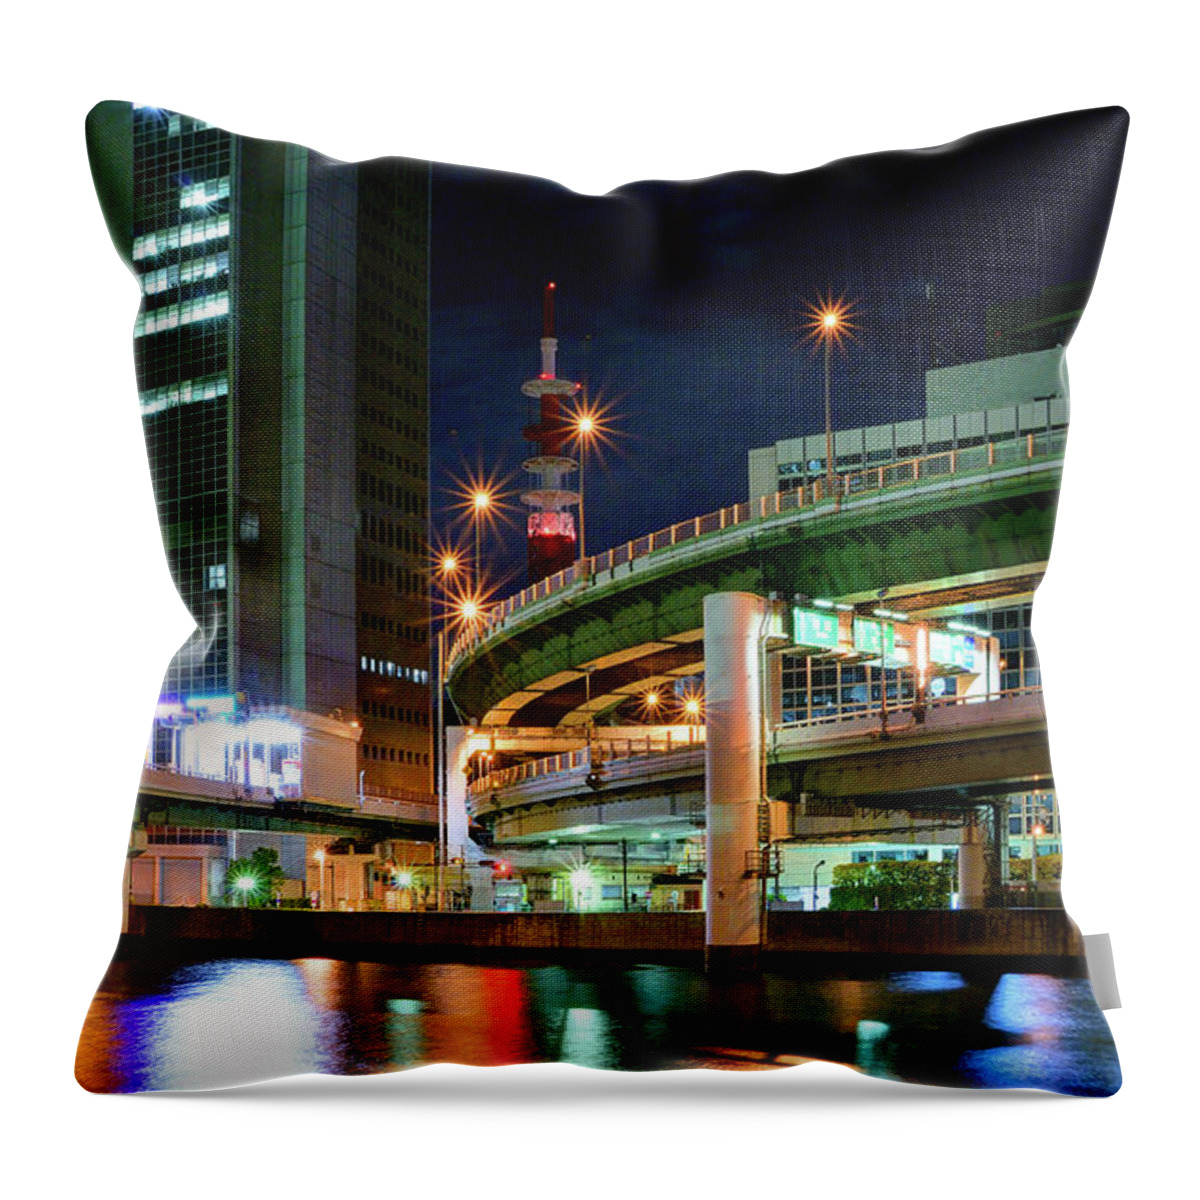 Osaka Prefecture Throw Pillow featuring the photograph Hanshin Highway Route 1 Loop Route by Christinayan By Takahiro Yanai